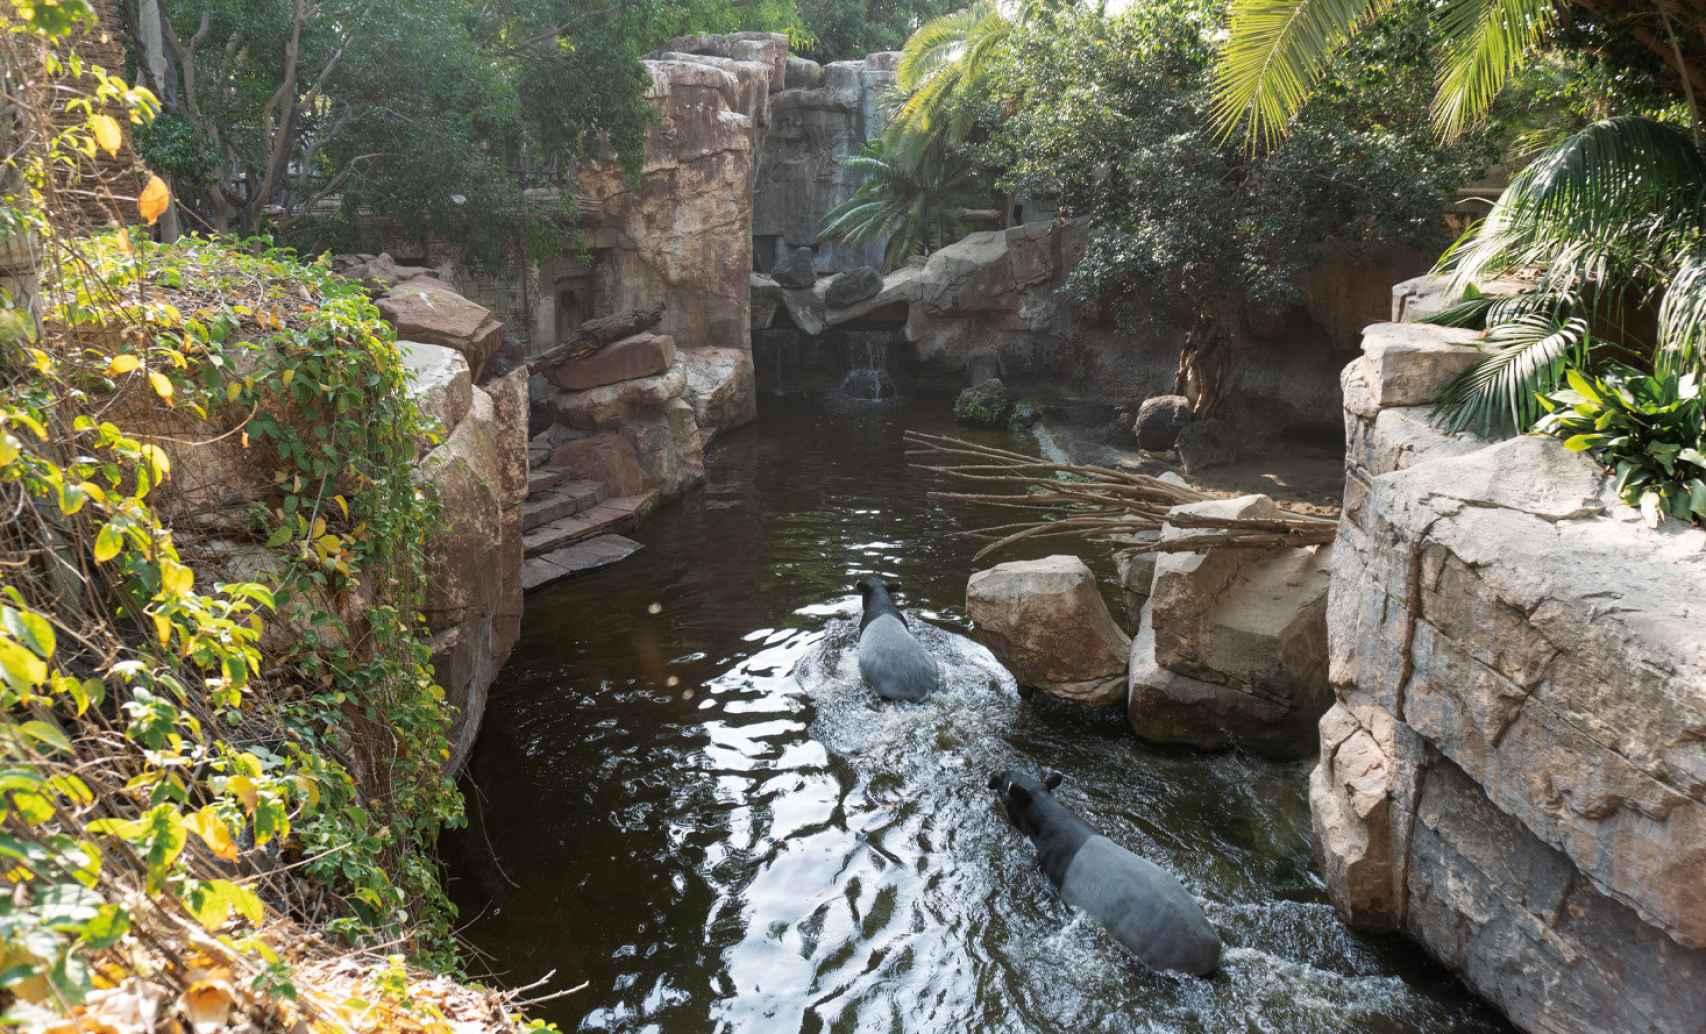 Tapirs are adapted to a humid, jungle habitat.